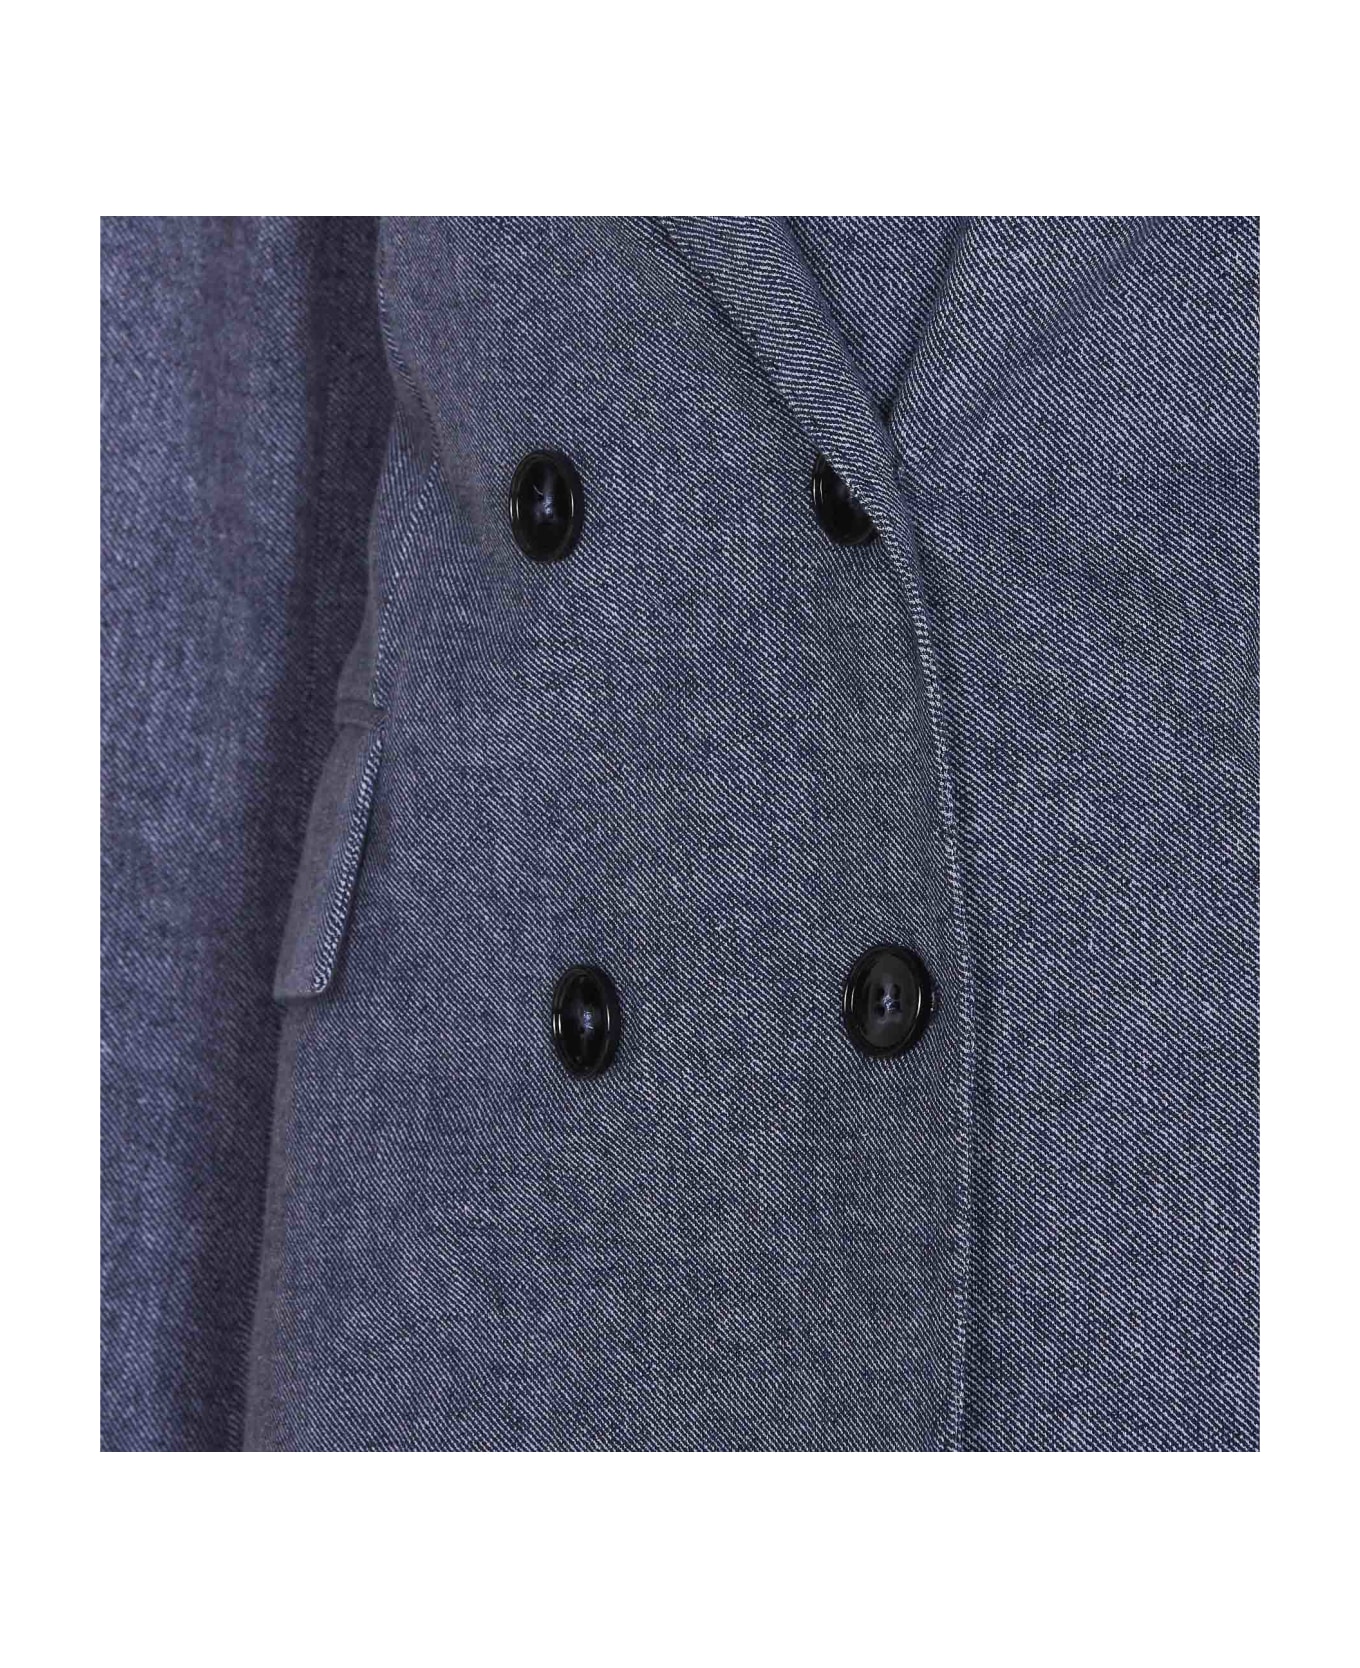 Circolo 1901 Double Breasted Buttons Jacket - Blue